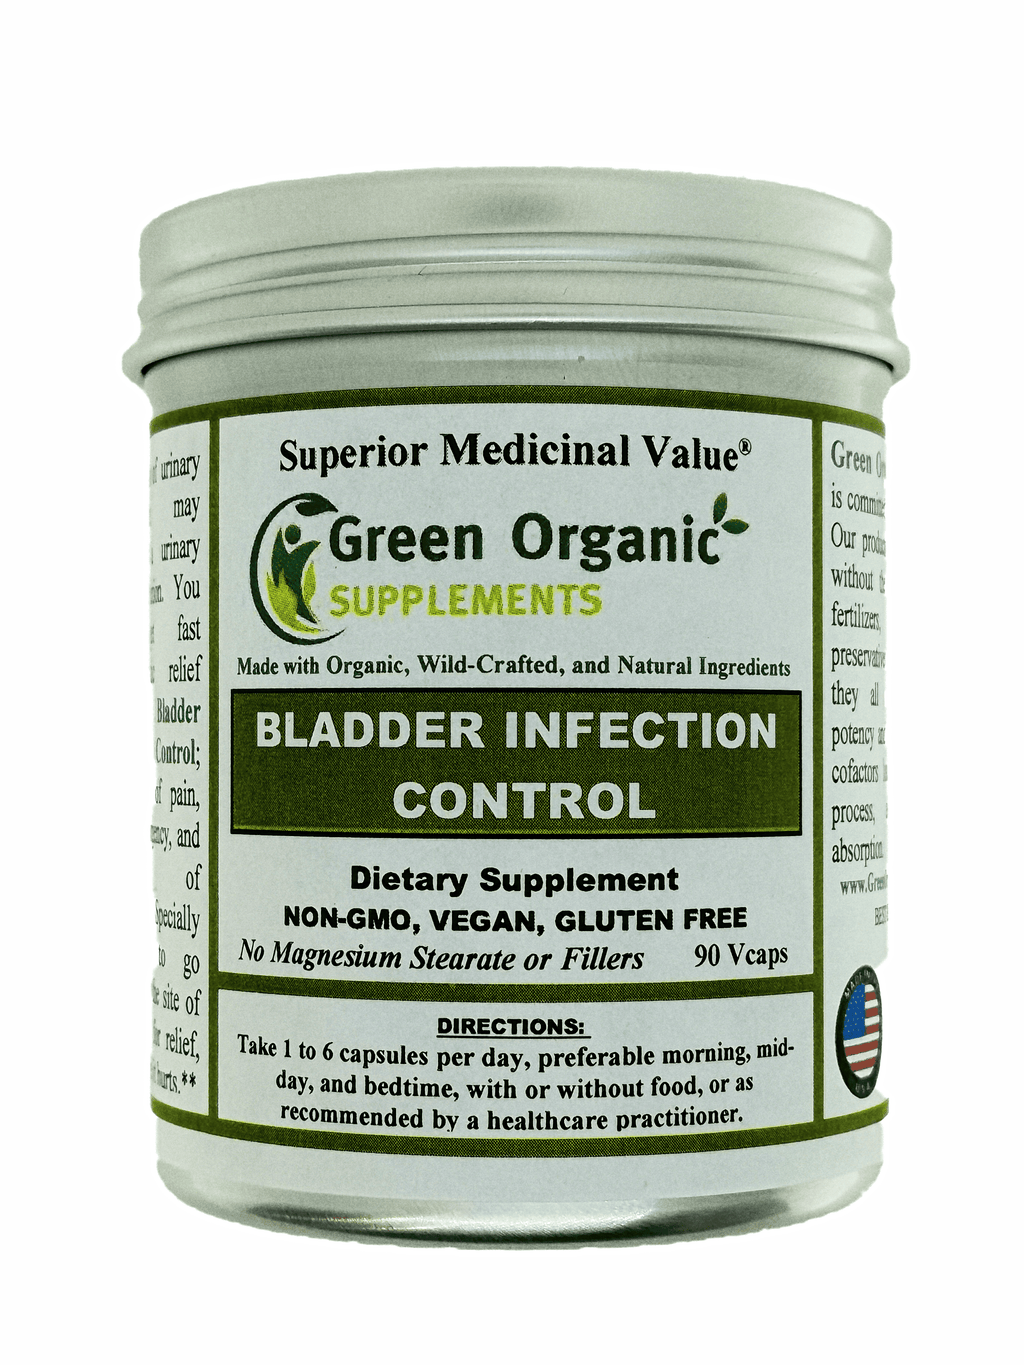 Bladder Infection, Urinary Tract Infection